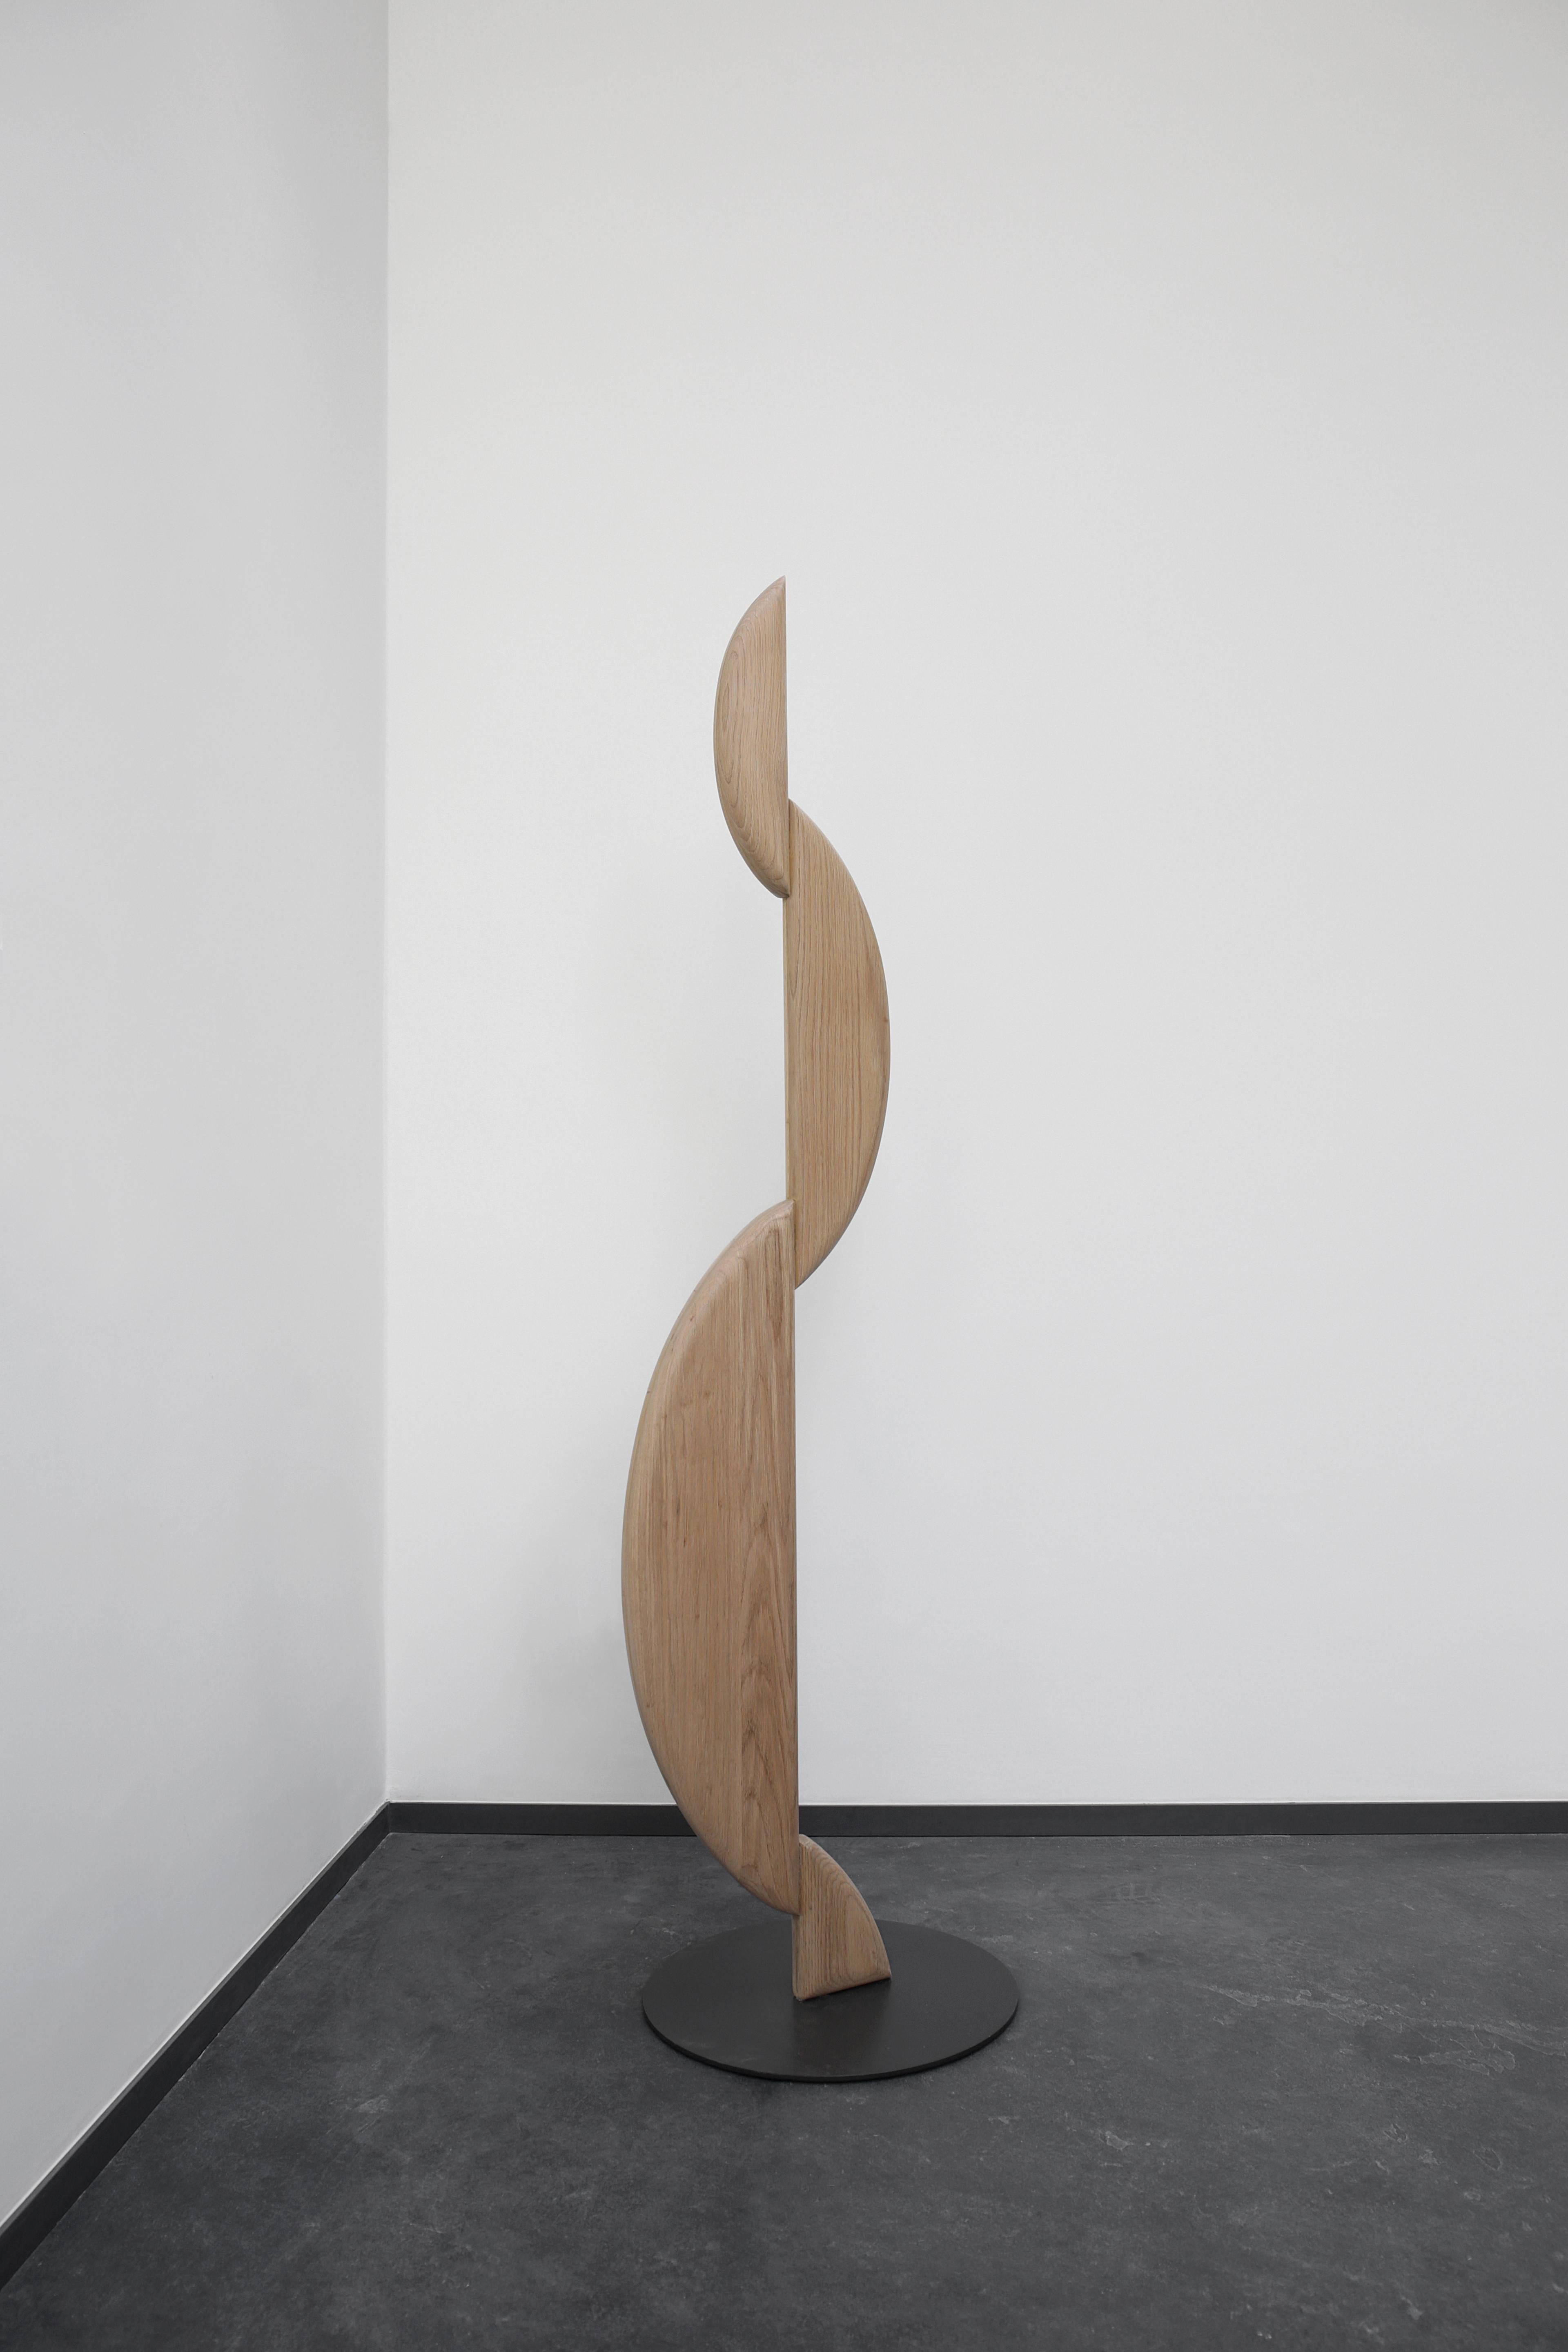 Noviembre II Standing Sculpture inspired in Brancusi, Solid Wood, Joel Escalona

The Noviembre collection is inspired by the creative values of Constantin Brancusi, a Romanian sculptor considered one of the most influential artists of the twentieth